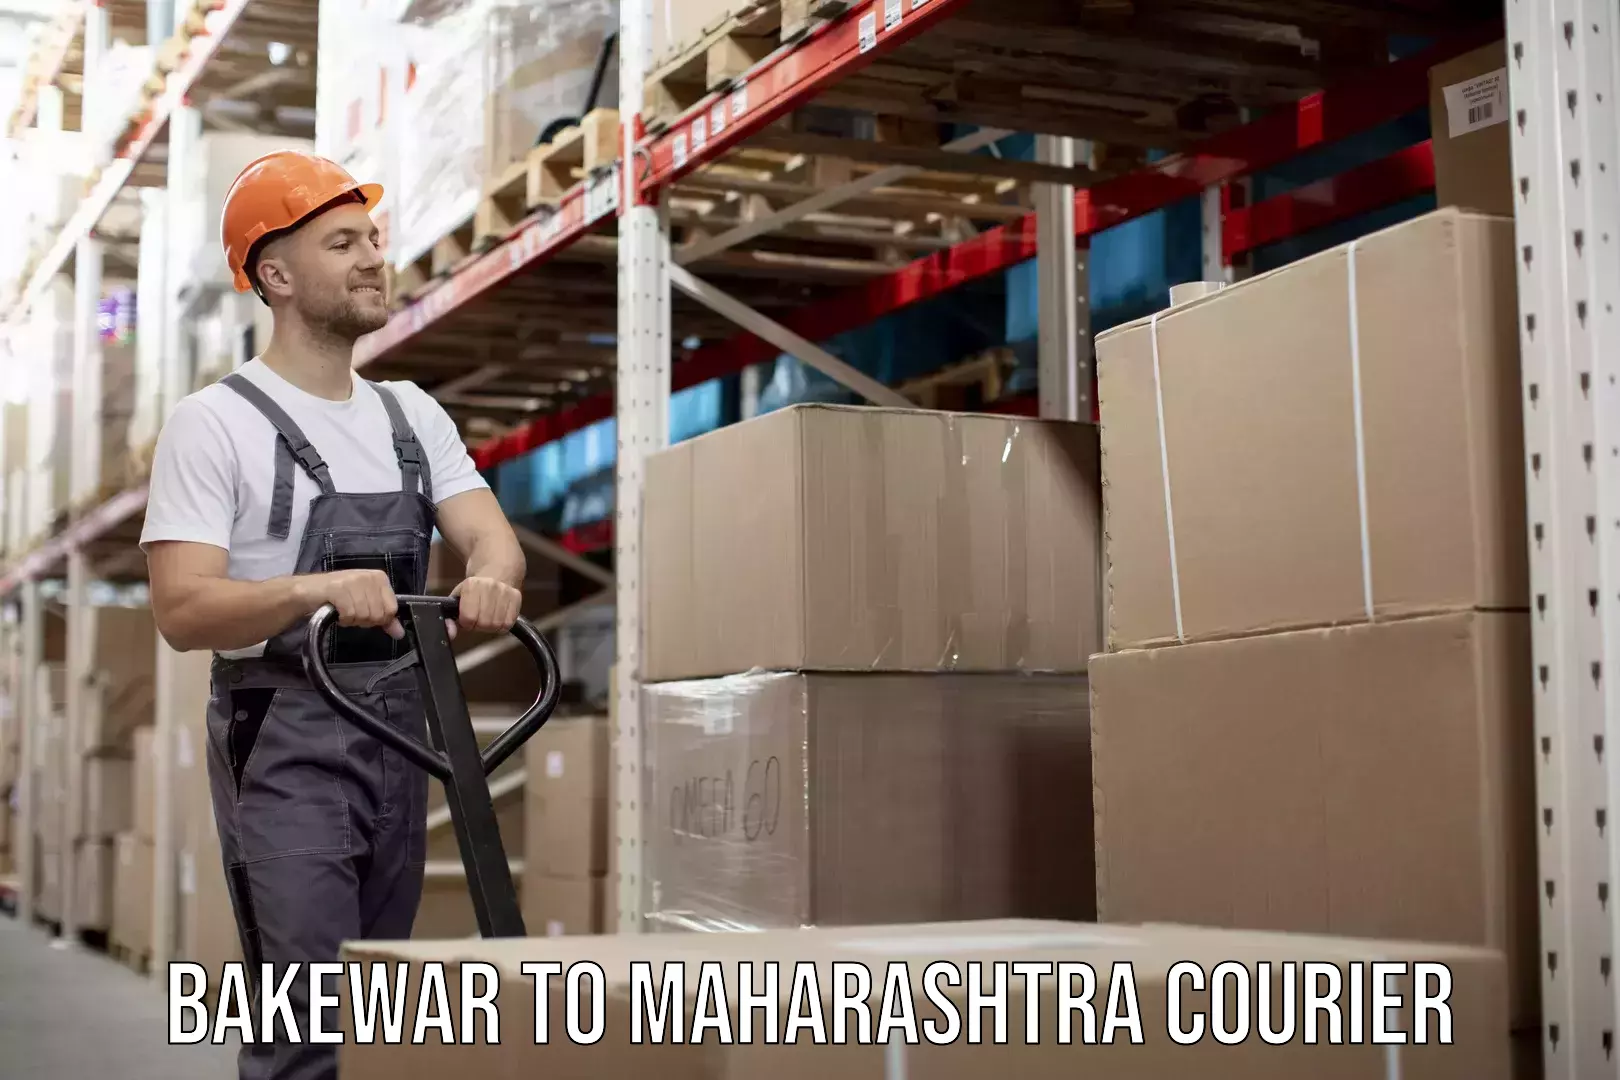 Package delivery network Bakewar to Maharashtra